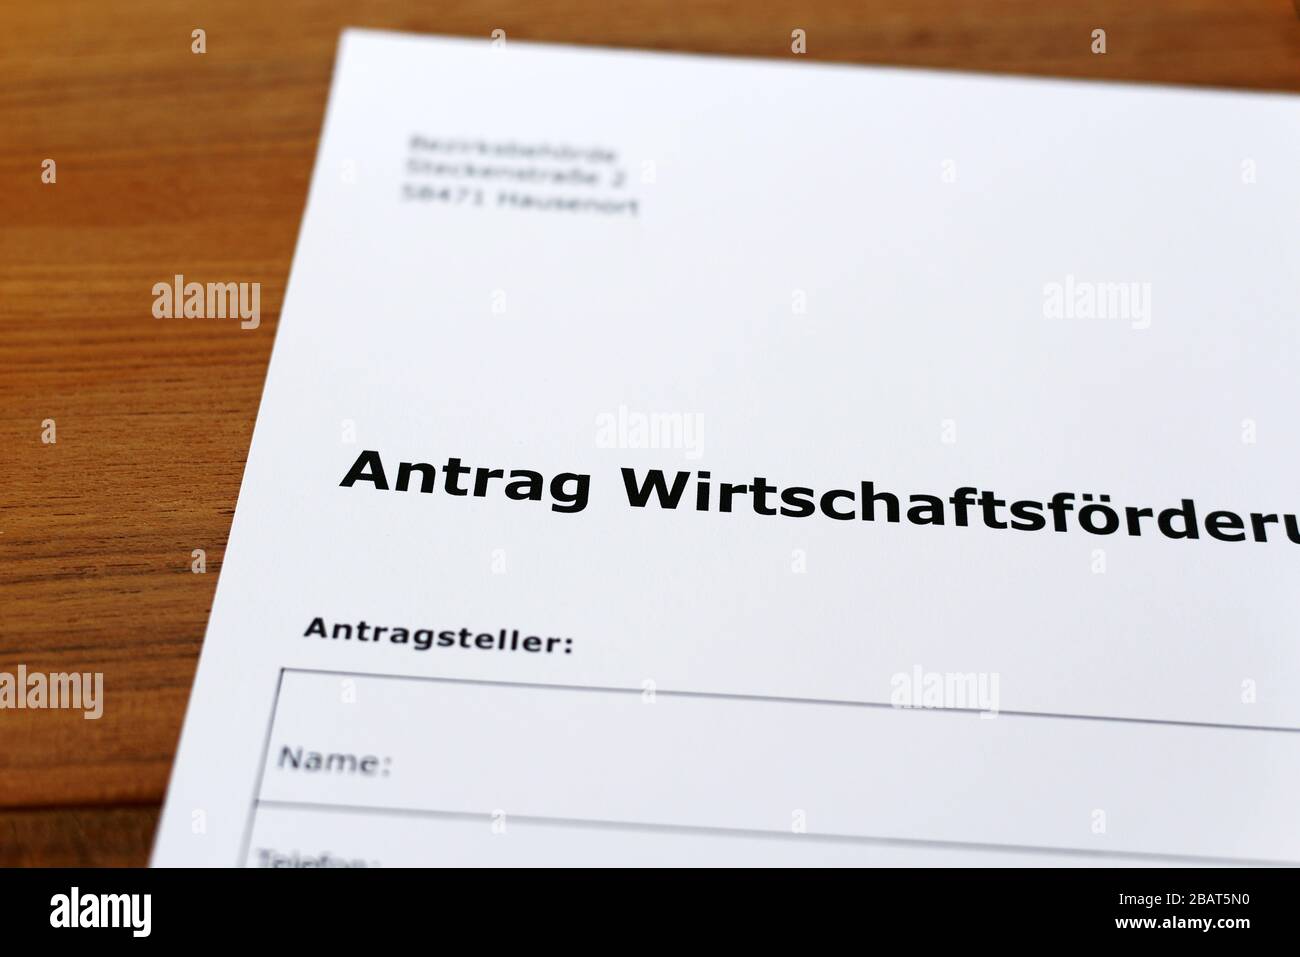 A sheet of paper with the german words 'Antrag Wirtschaftsförderung' - Translation in englisch: Application for business development. Stock Photo